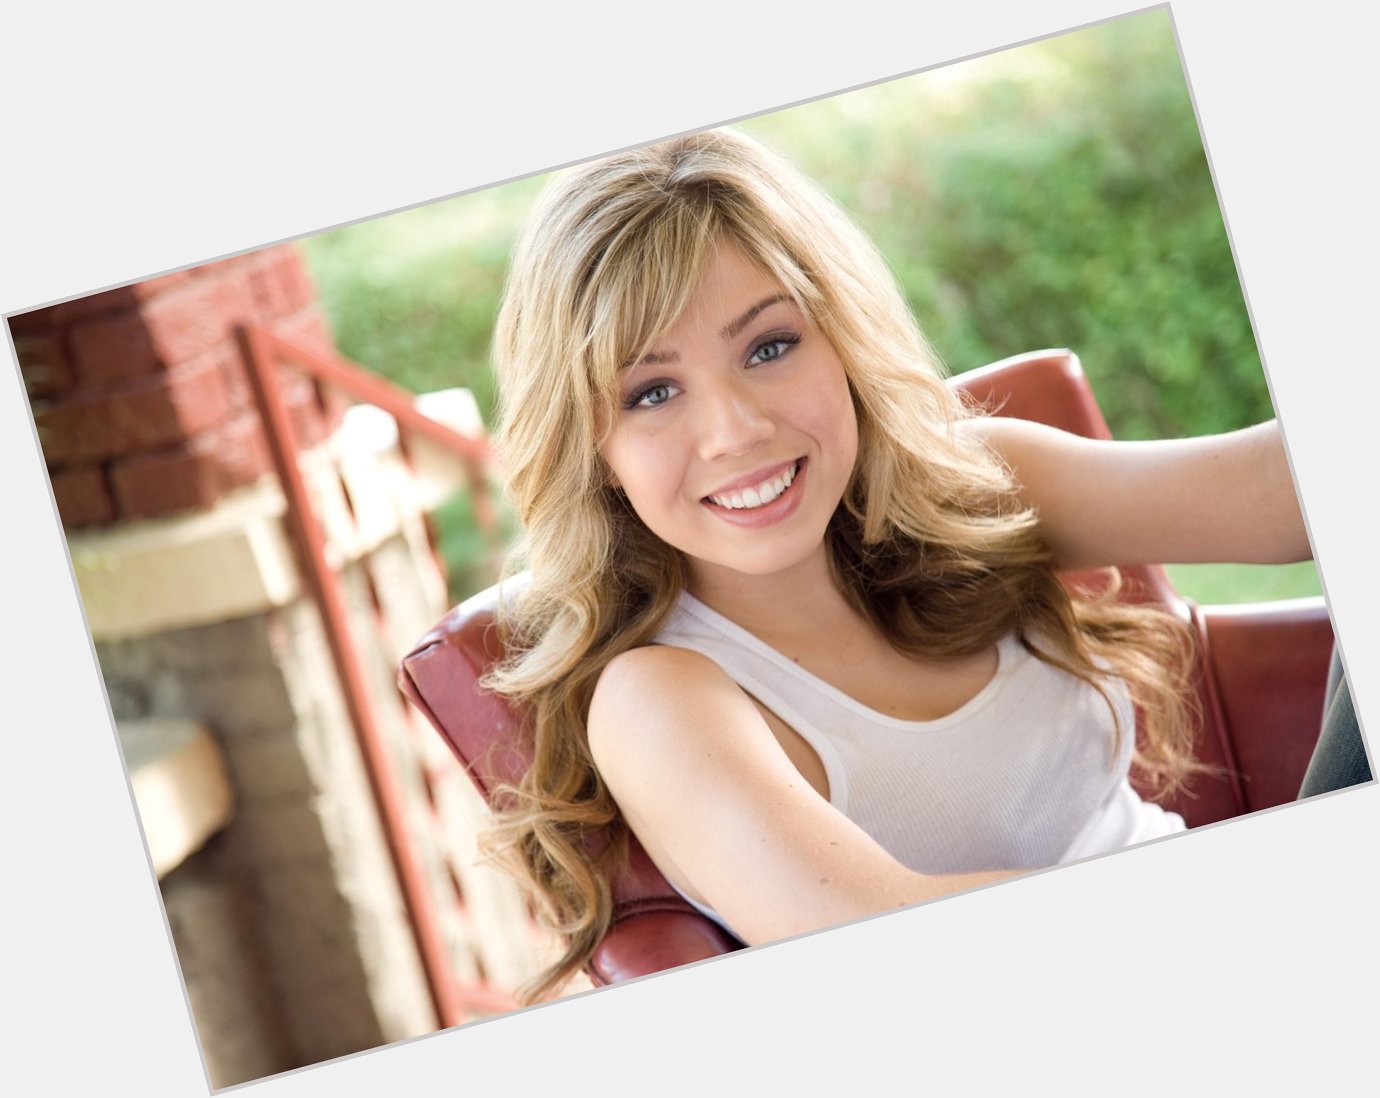 Happy Birthday to Jennette McCurdy (\ICARLY\) who turns 31 today!  